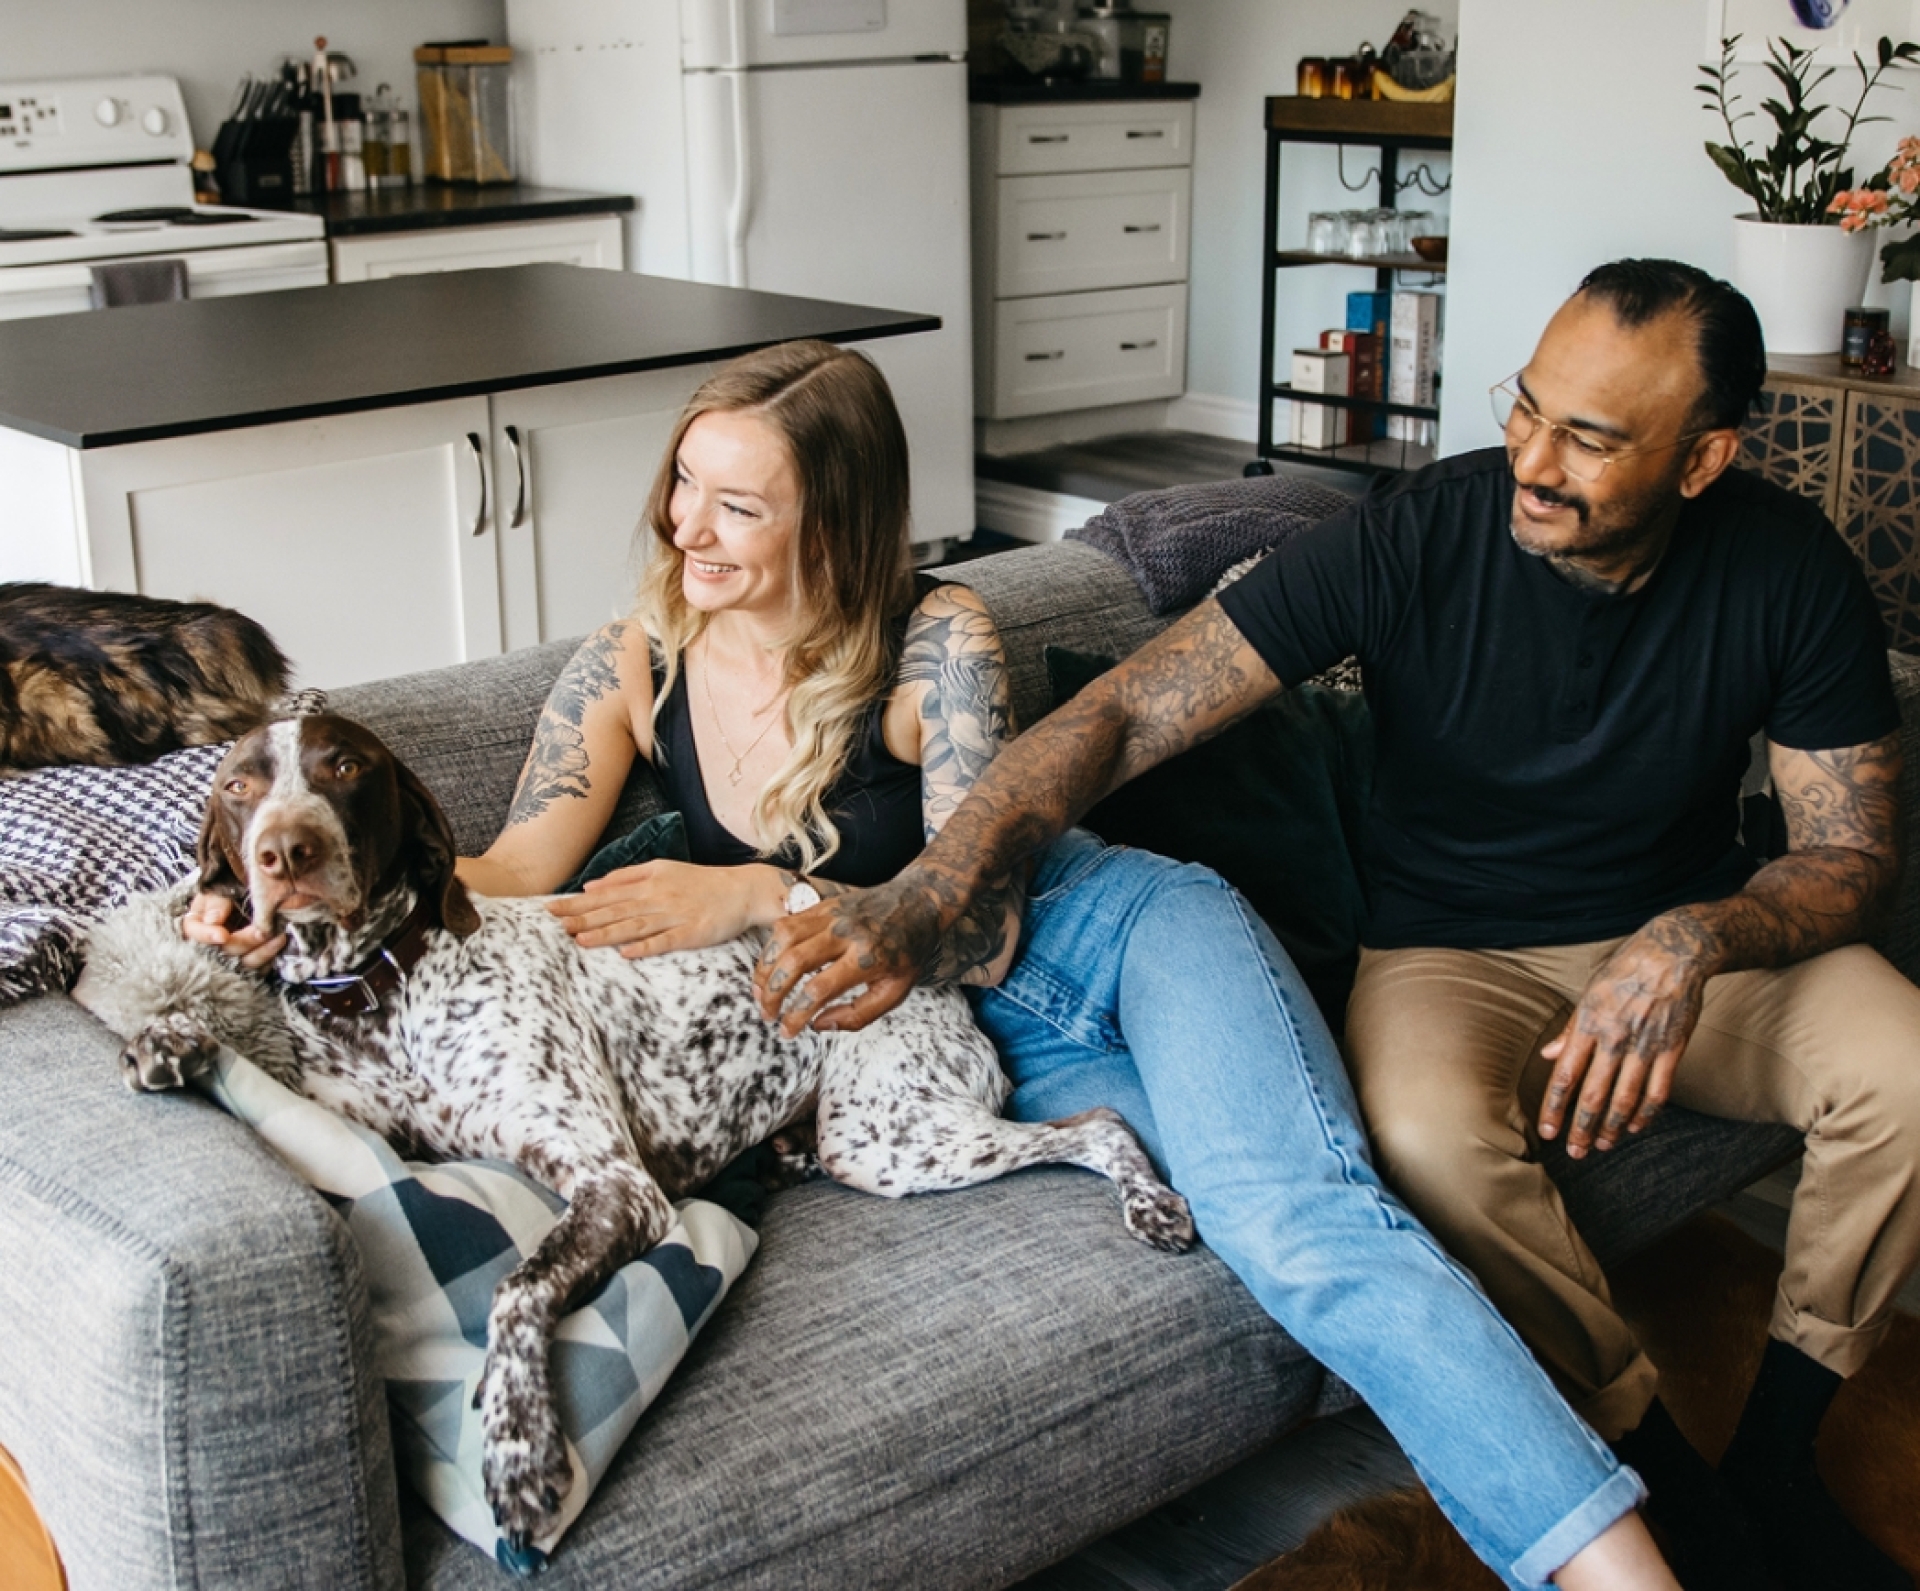 Nutram social media marketing: A family and their dog sitting on a couch